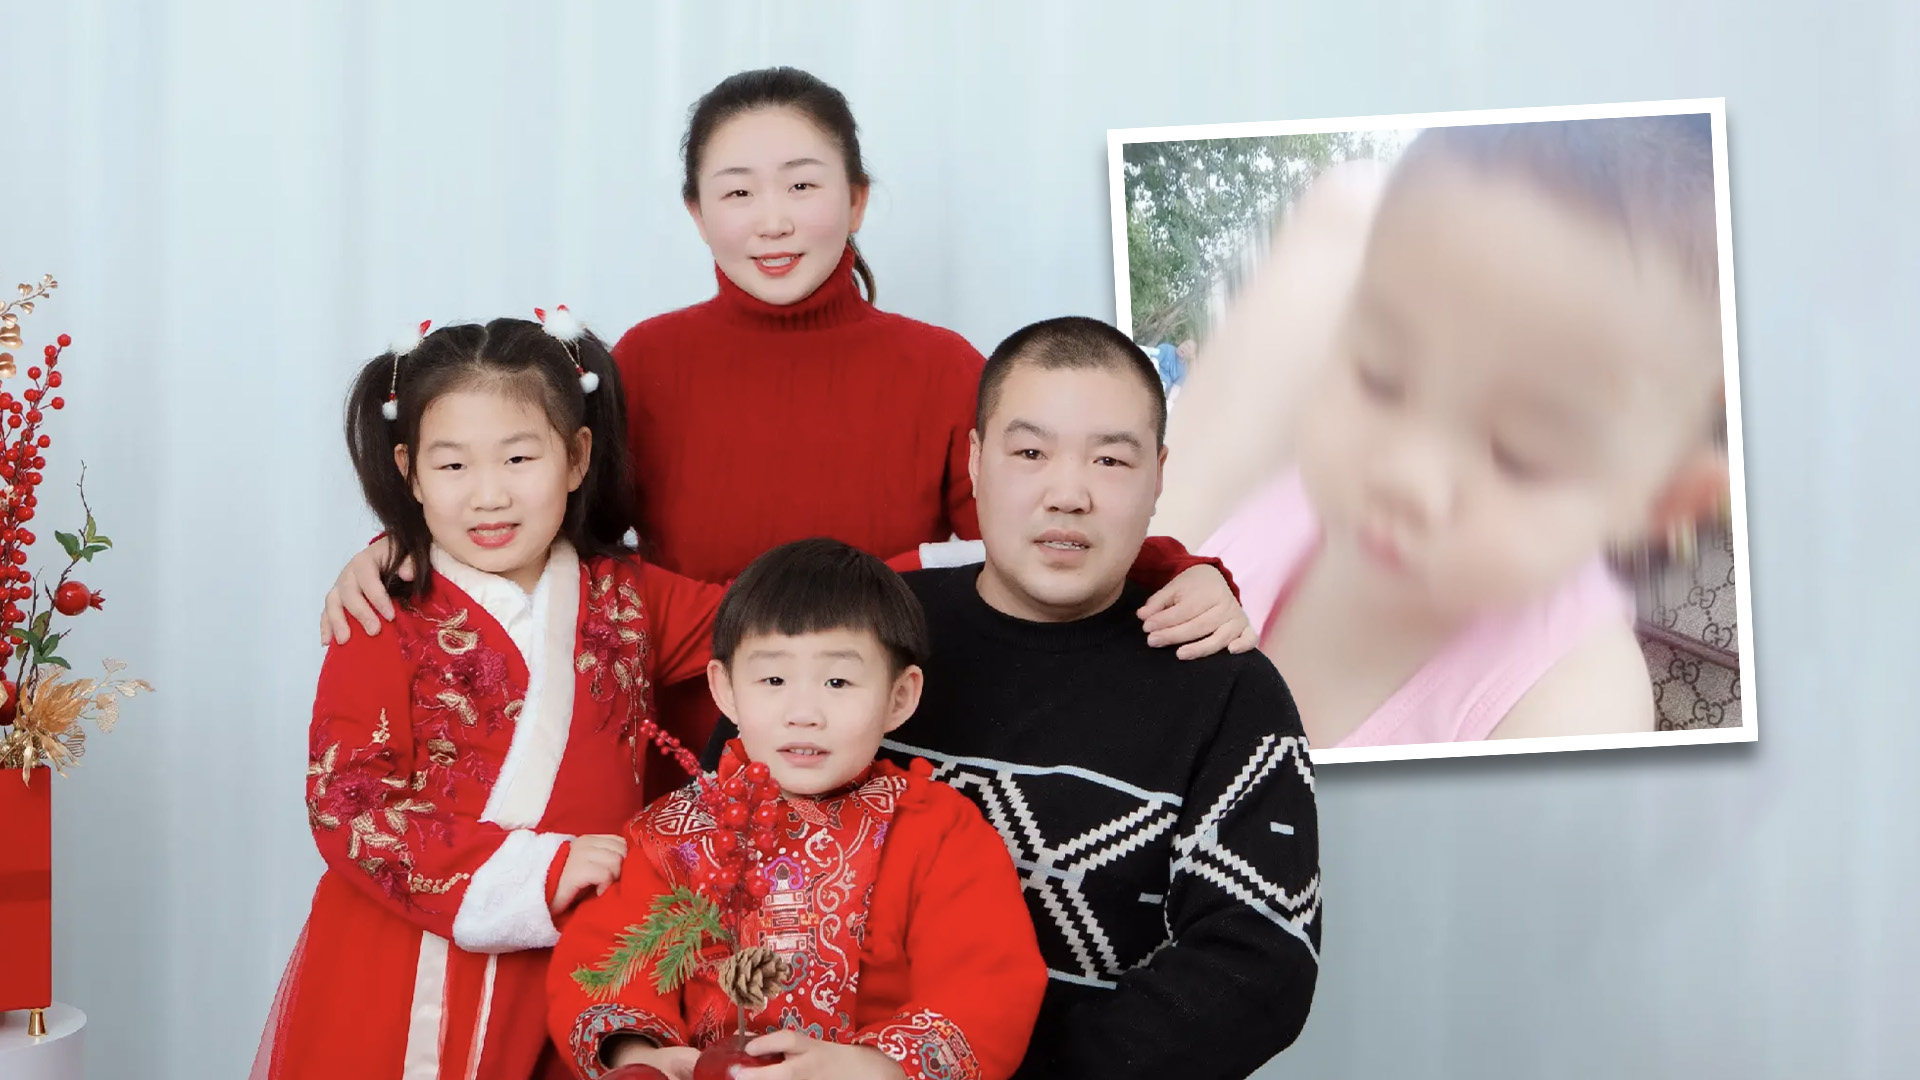 A broken family that reunited for the sake of their five-year-old autistic son has inspired millions with their selfless act. Photo: SCMP composite/Handout